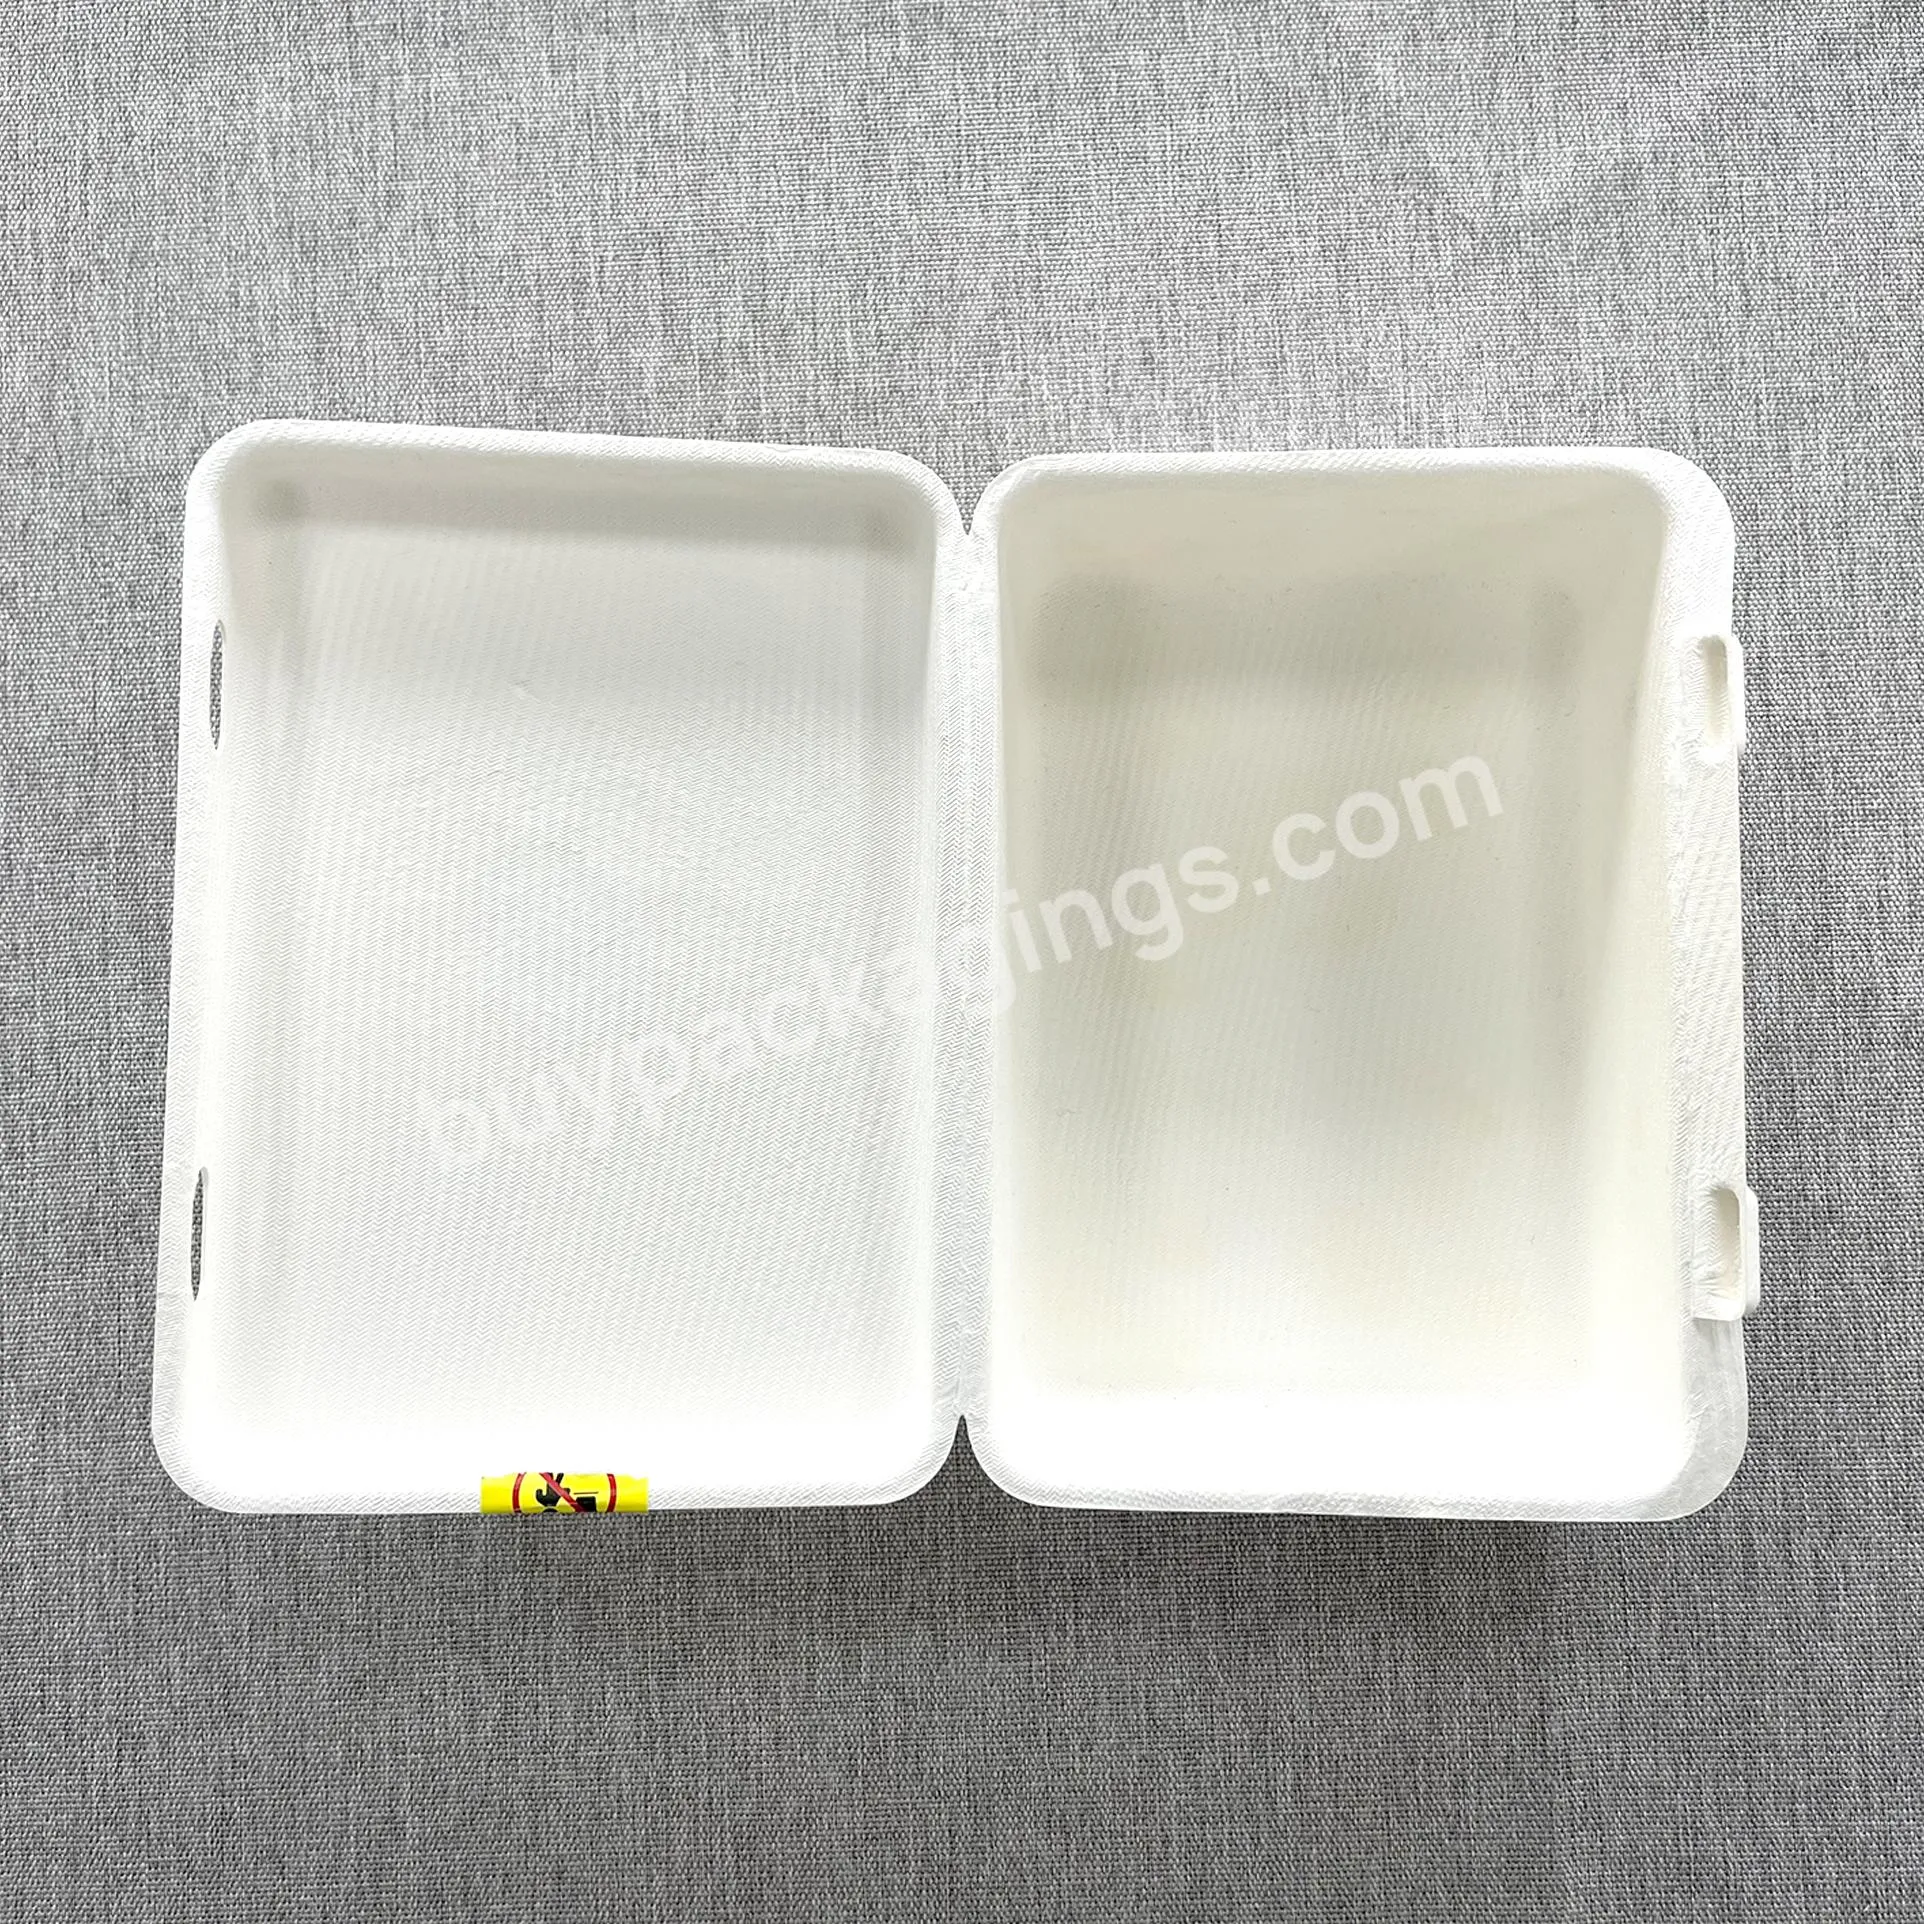 Custom Logo Printing Small Foldable Makeup Paper Stick Wet Press Molded Pulp Clothes Cosmetic Shipping Packaging Box - Buy Printing Small Fold Paper Box Packaging Box,Makeup Paper Stick Packaging Foldable Box,Molded Pulp Clothes Packaging Box.